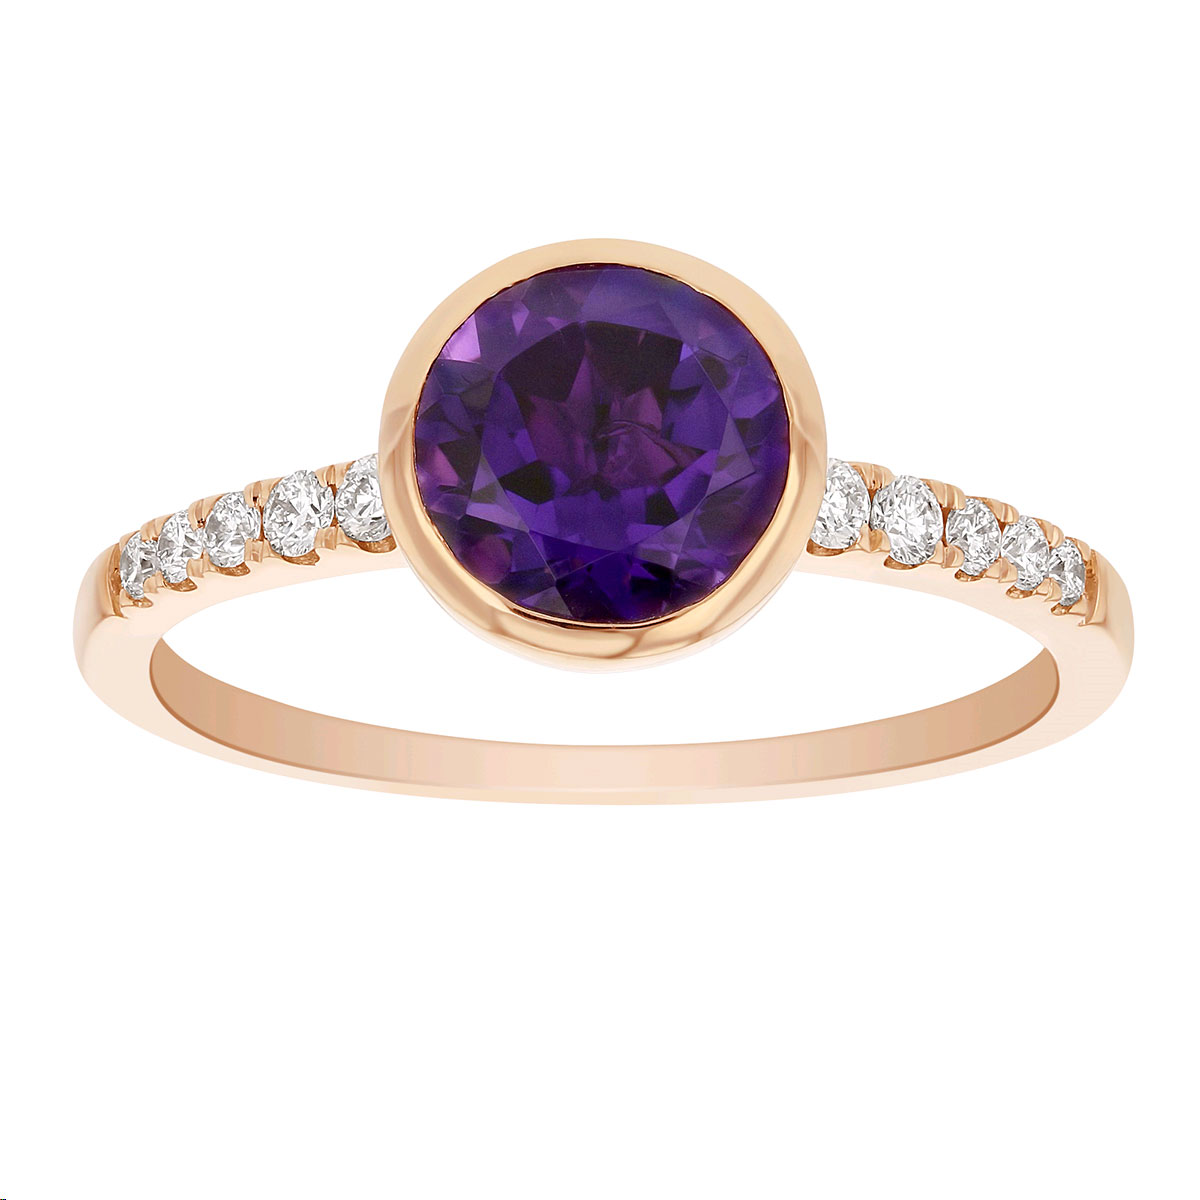 Round Amethyst Bezel Set Ring with Diamond Shank in Rose Gold | Borsheims